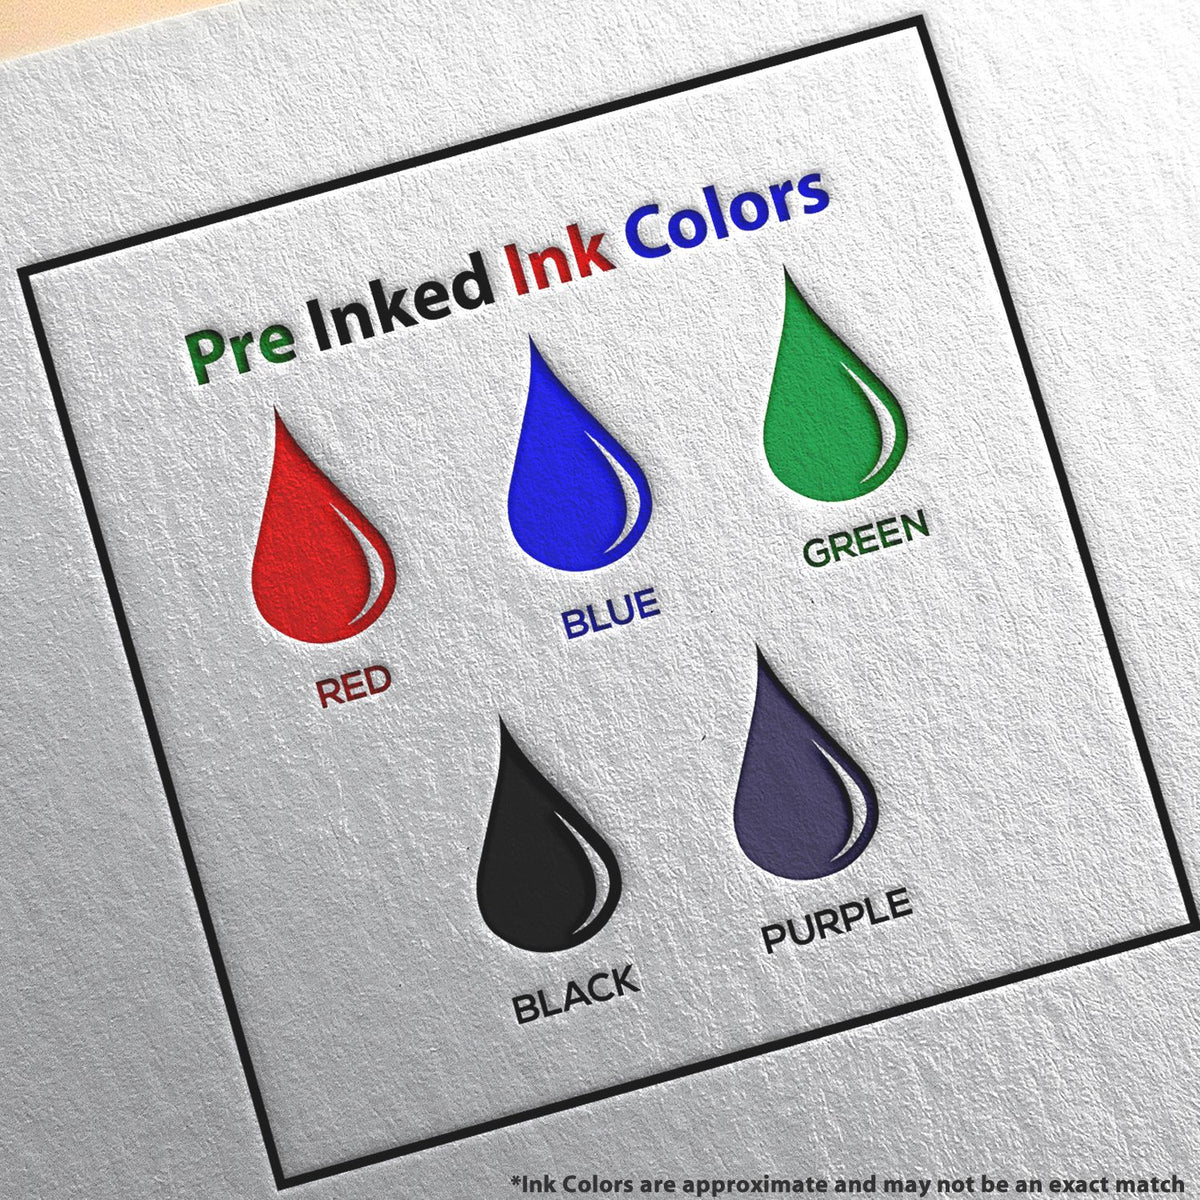 A picture showing the different ink colors or hues available for the Premium MaxLight Pre-Inked Wyoming Engineering Stamp product.